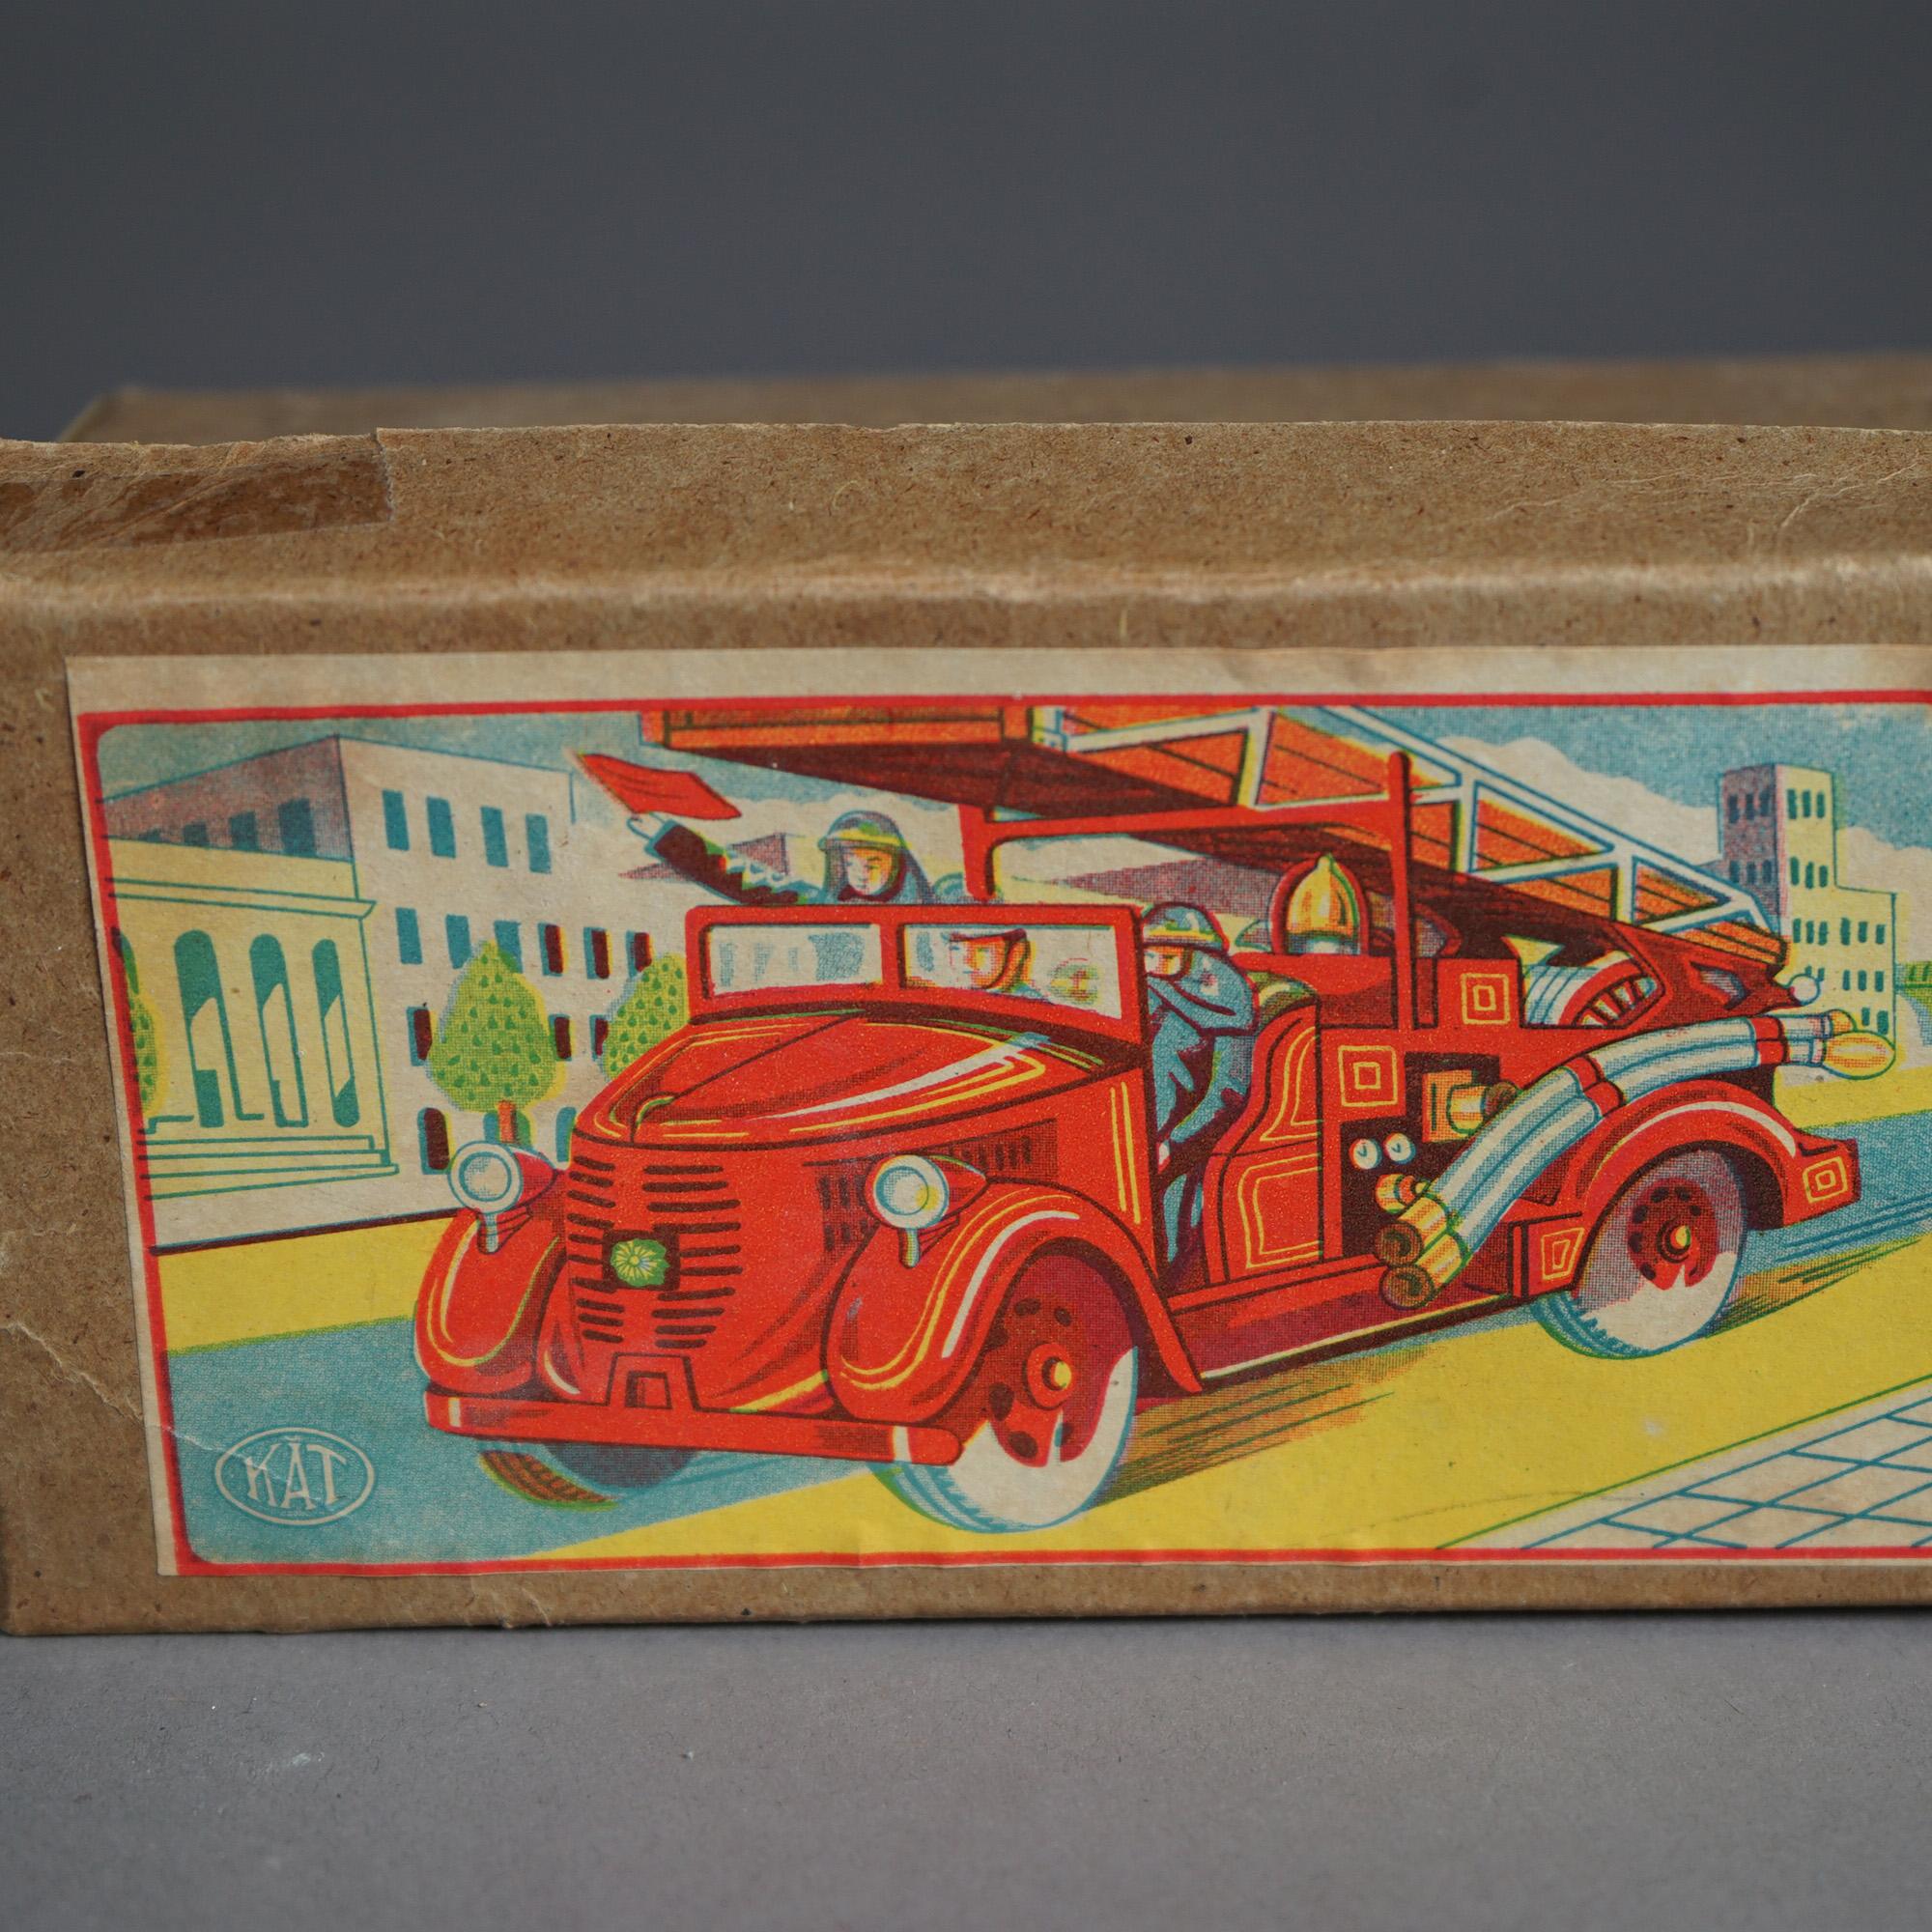 Japanese Tin Litho Toy Fire Engine In The Original Box Circa 1950 5